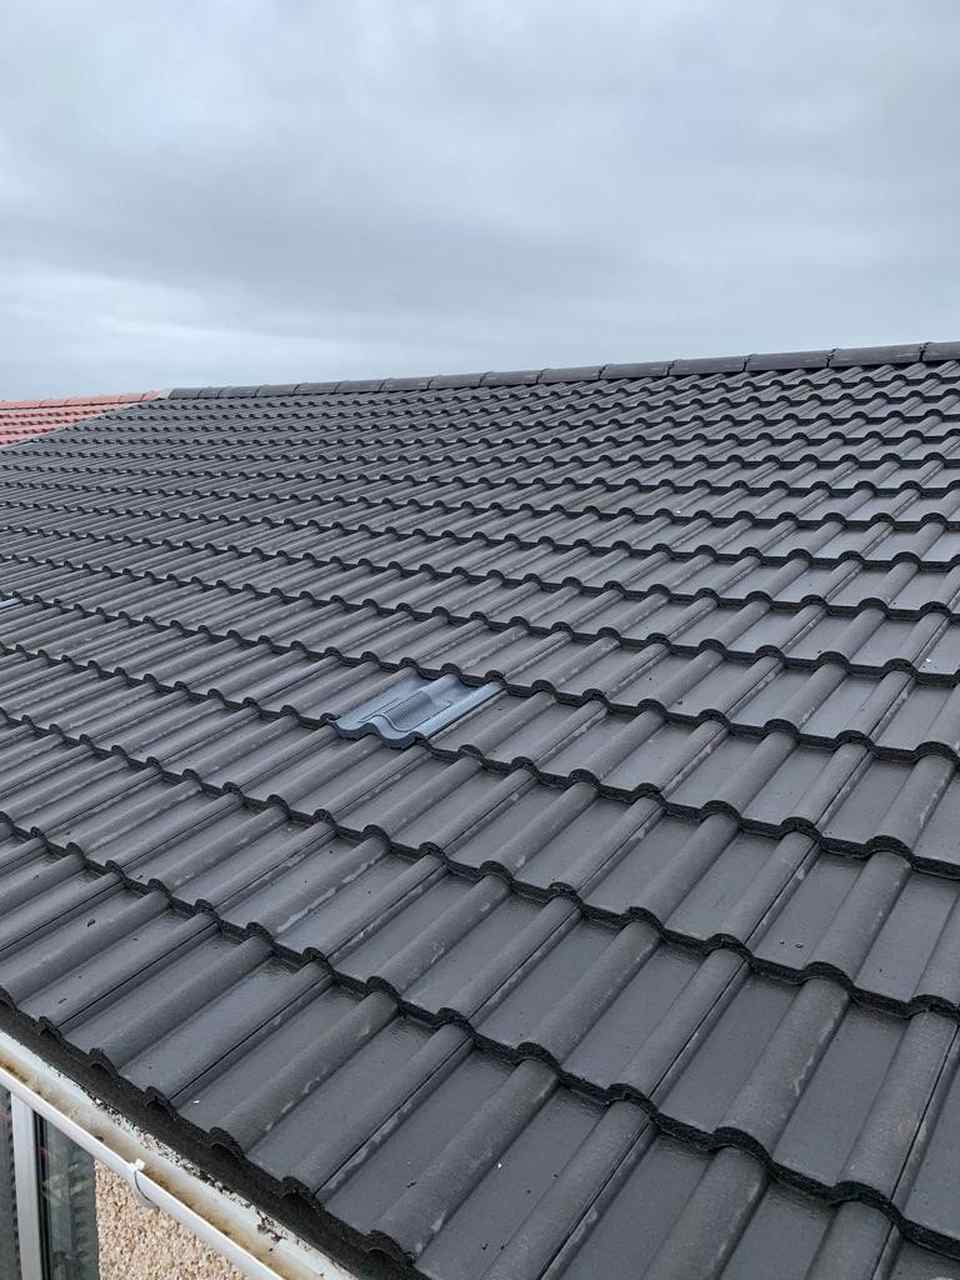 Repaired tiled roof